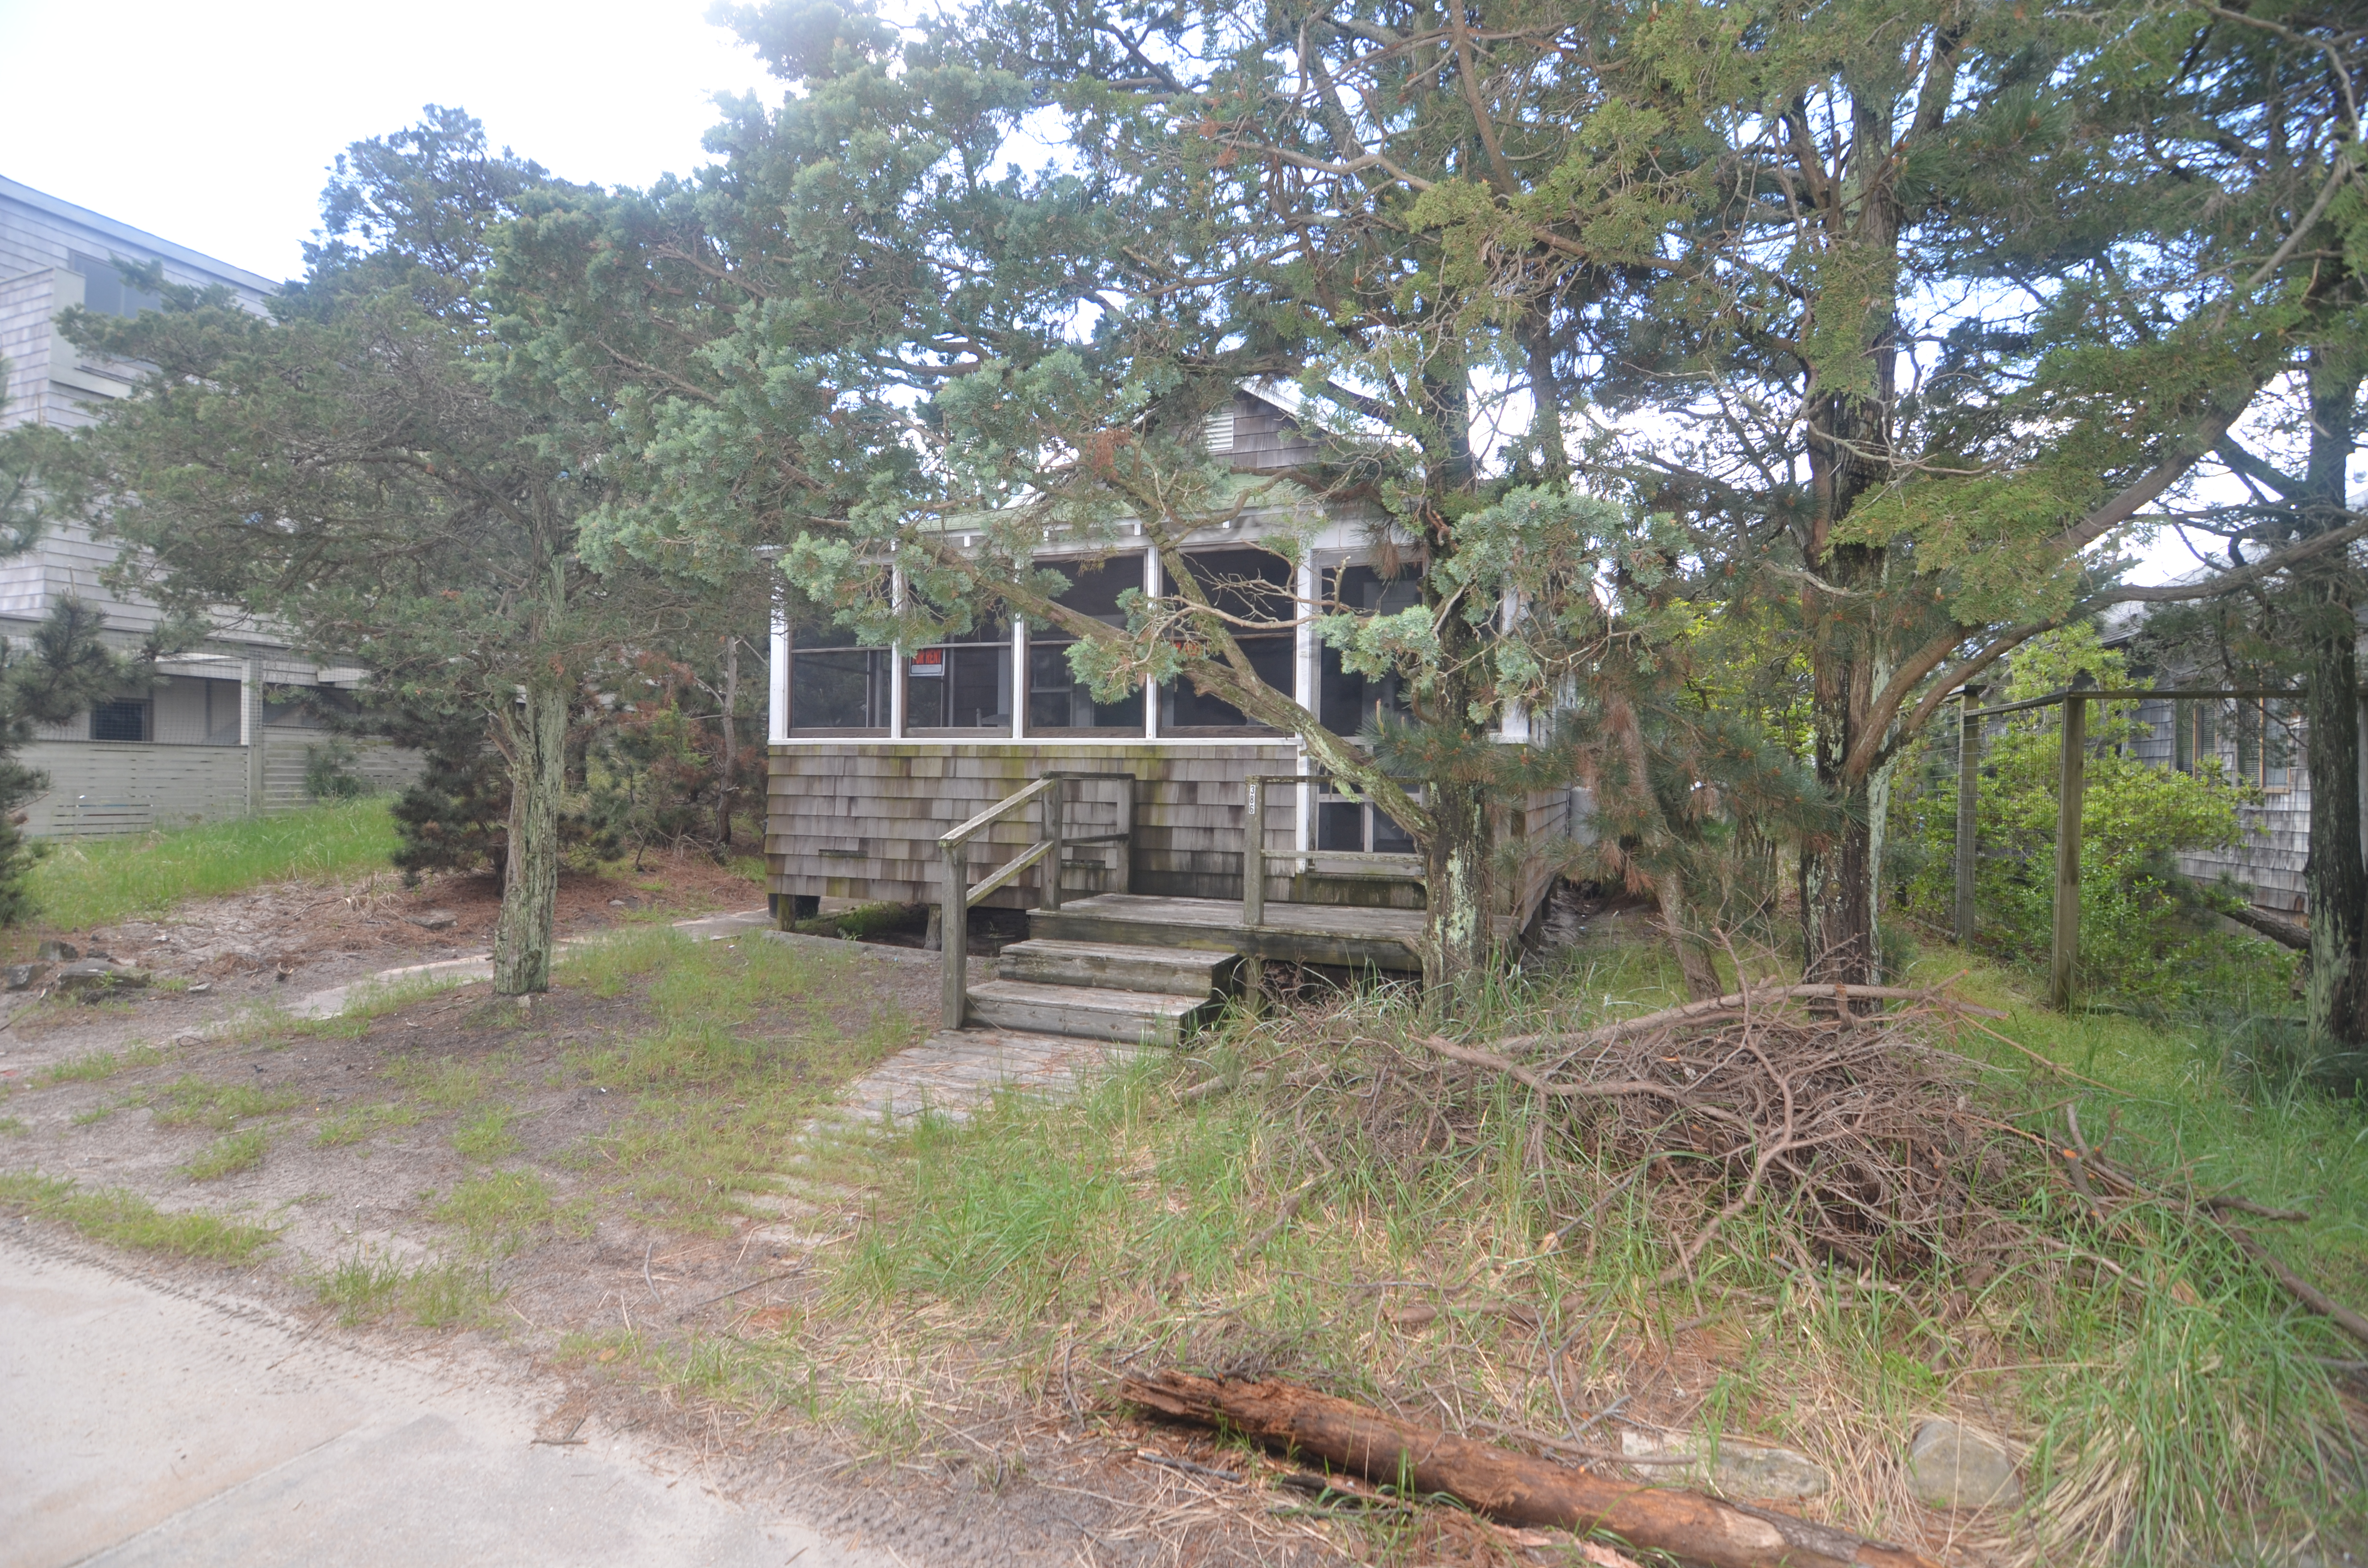 Don't miss this opportunity to own a true Fire Island original only 3 houses from the ocean! Situated on a 50' x 84' lot with 3 bedrooms and 1 bathroom. Amazing location and priced to sell! 